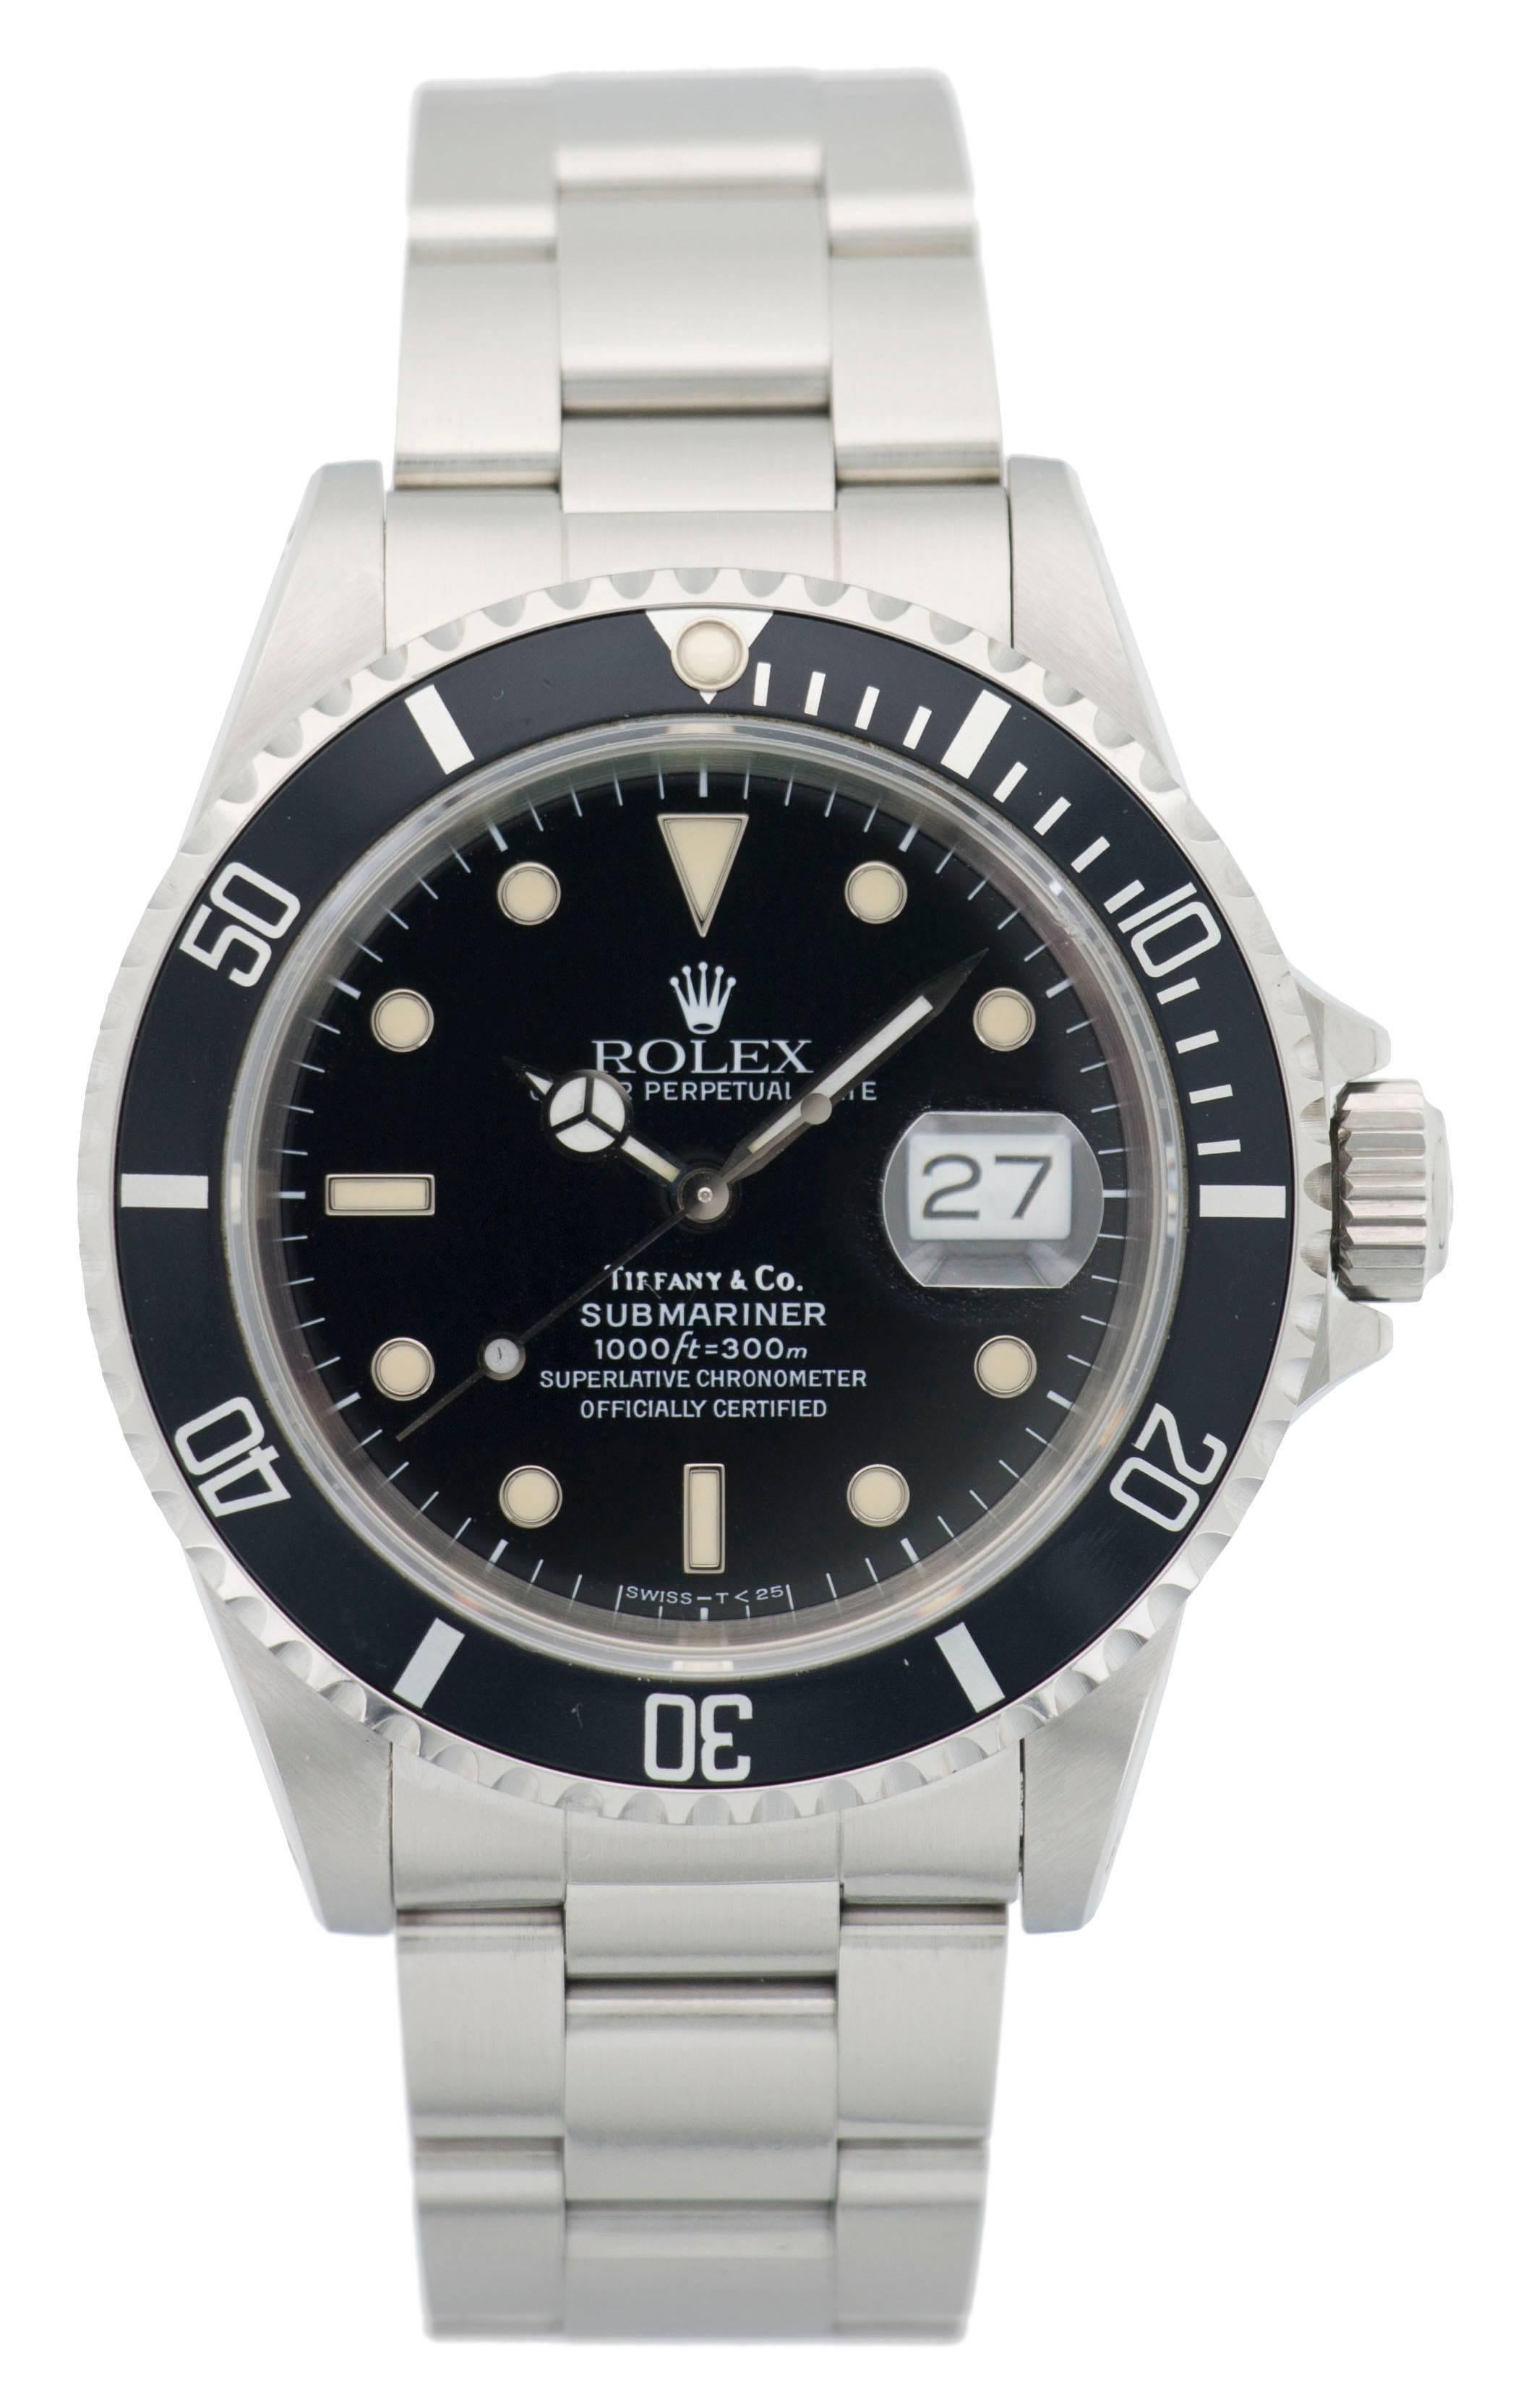 This Rolex Submariner, ref. 16610 was produced in 1991 and originally retailed by Tiffany & Co. The watch is in mint condition, with a fantastic case, slightly patinad markers and a mint condition dial. It comes with the original papers marked for